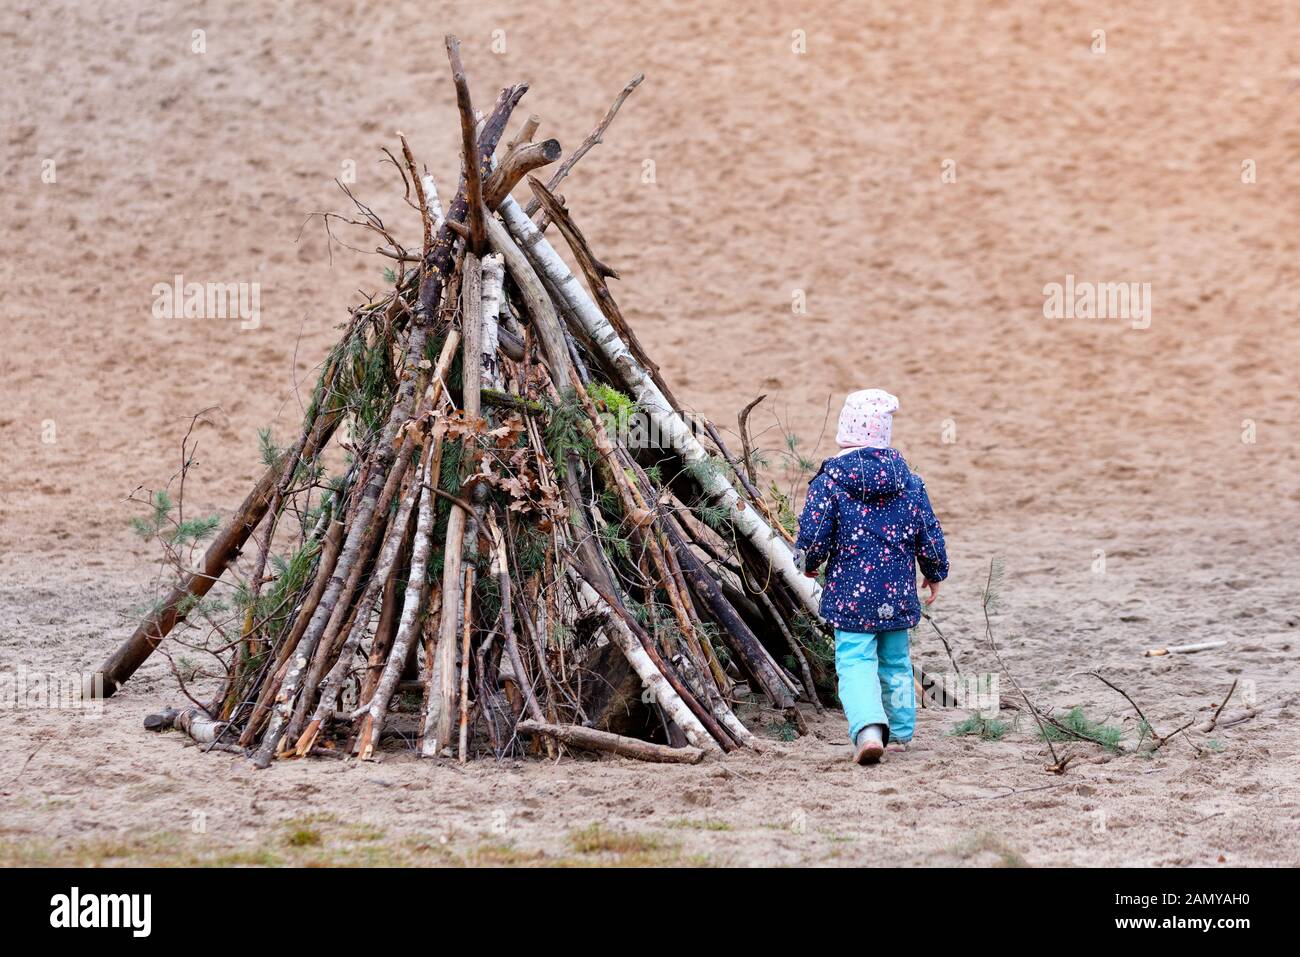 Child girl walking to a conical tepee built of branches from the woods on a huge sand dune. Seen in Germany in January. Stock Photo